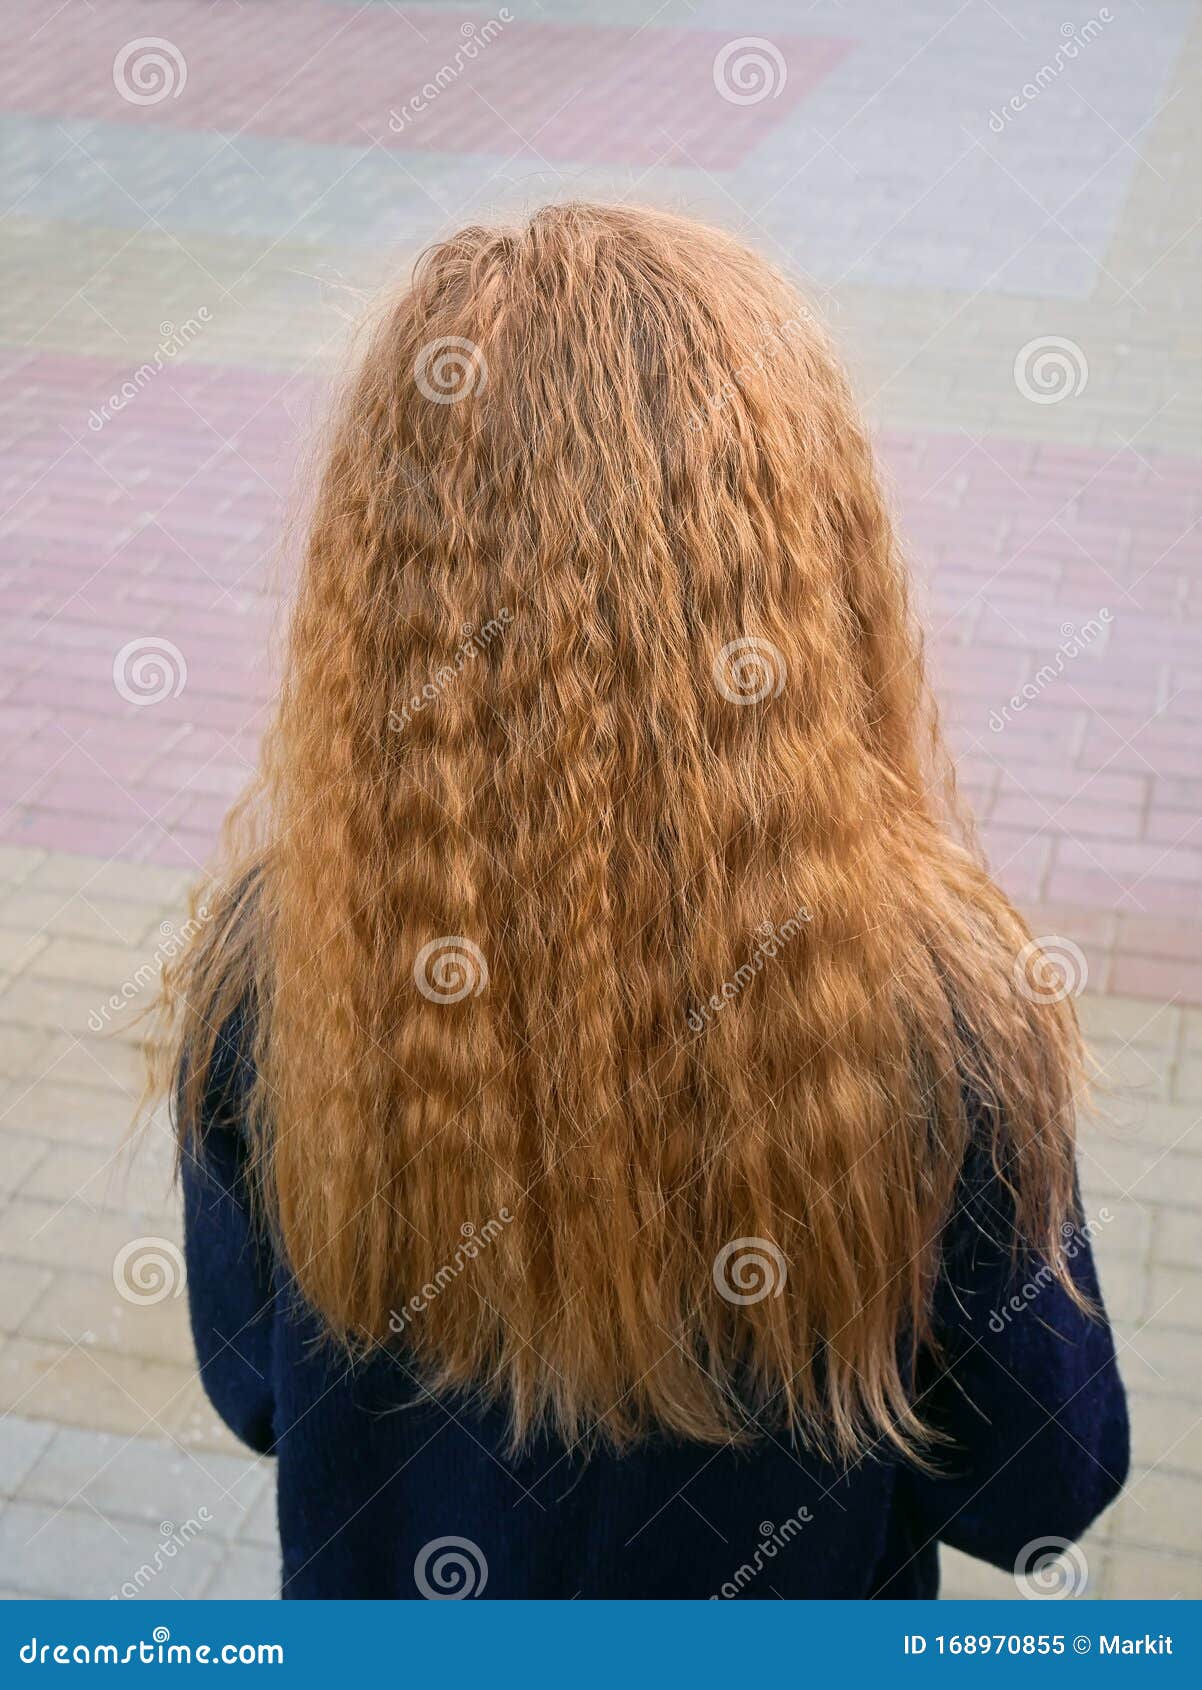 Little Girl with Long Flowing Wavy Blond Hair Stock Image - Image of  natural, brown: 168970855